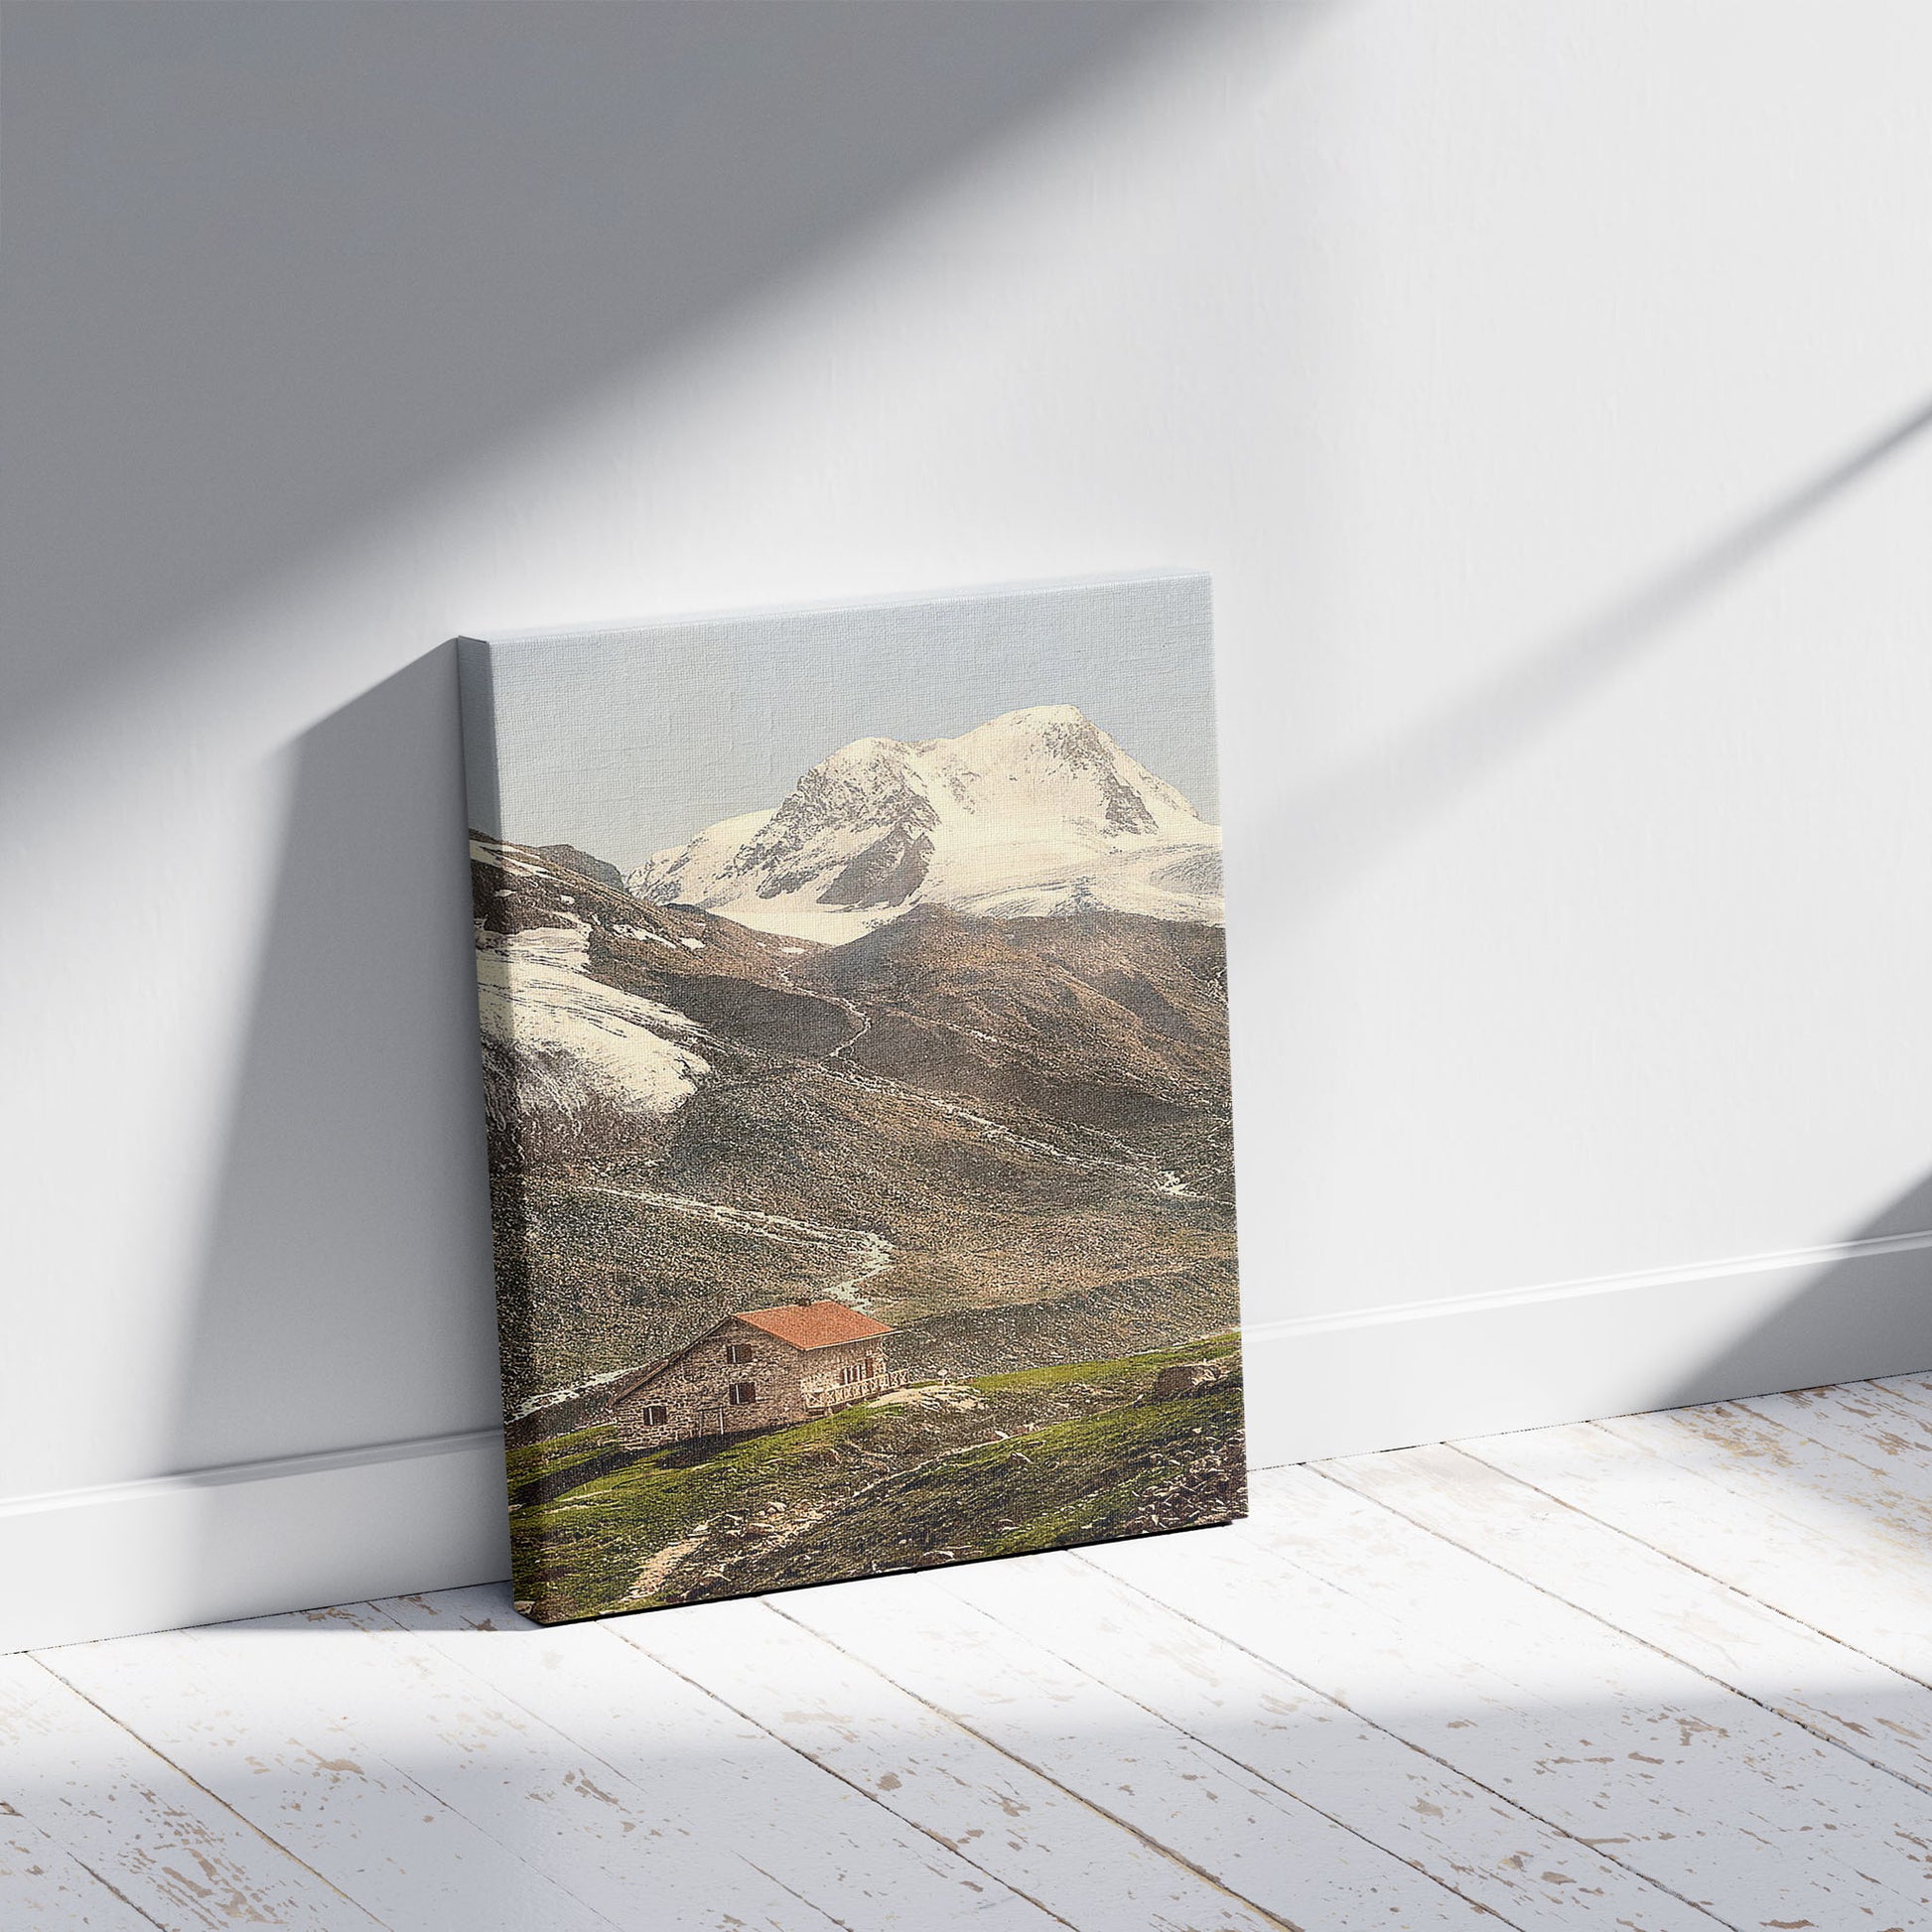 A picture of Stubaithal (i.e., Stubaital), Dresdenerhut and Schaufelspitze, Tyrol, Austro-Hungary, a mockup of the print leaning against a wall